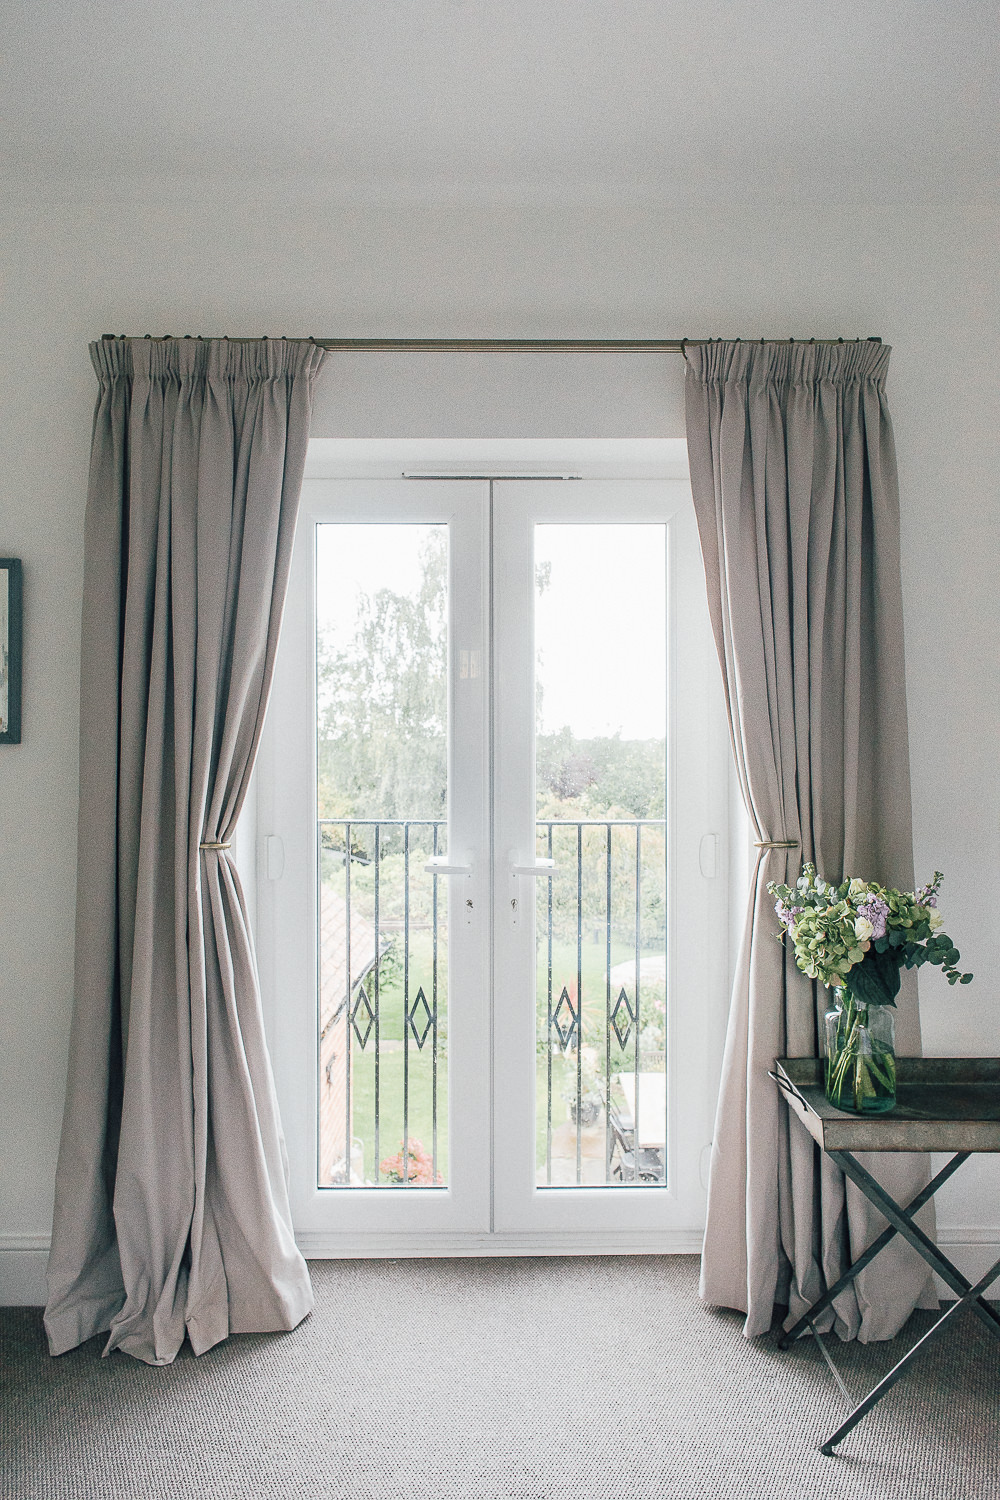 Grey curtains pulled back to let in light